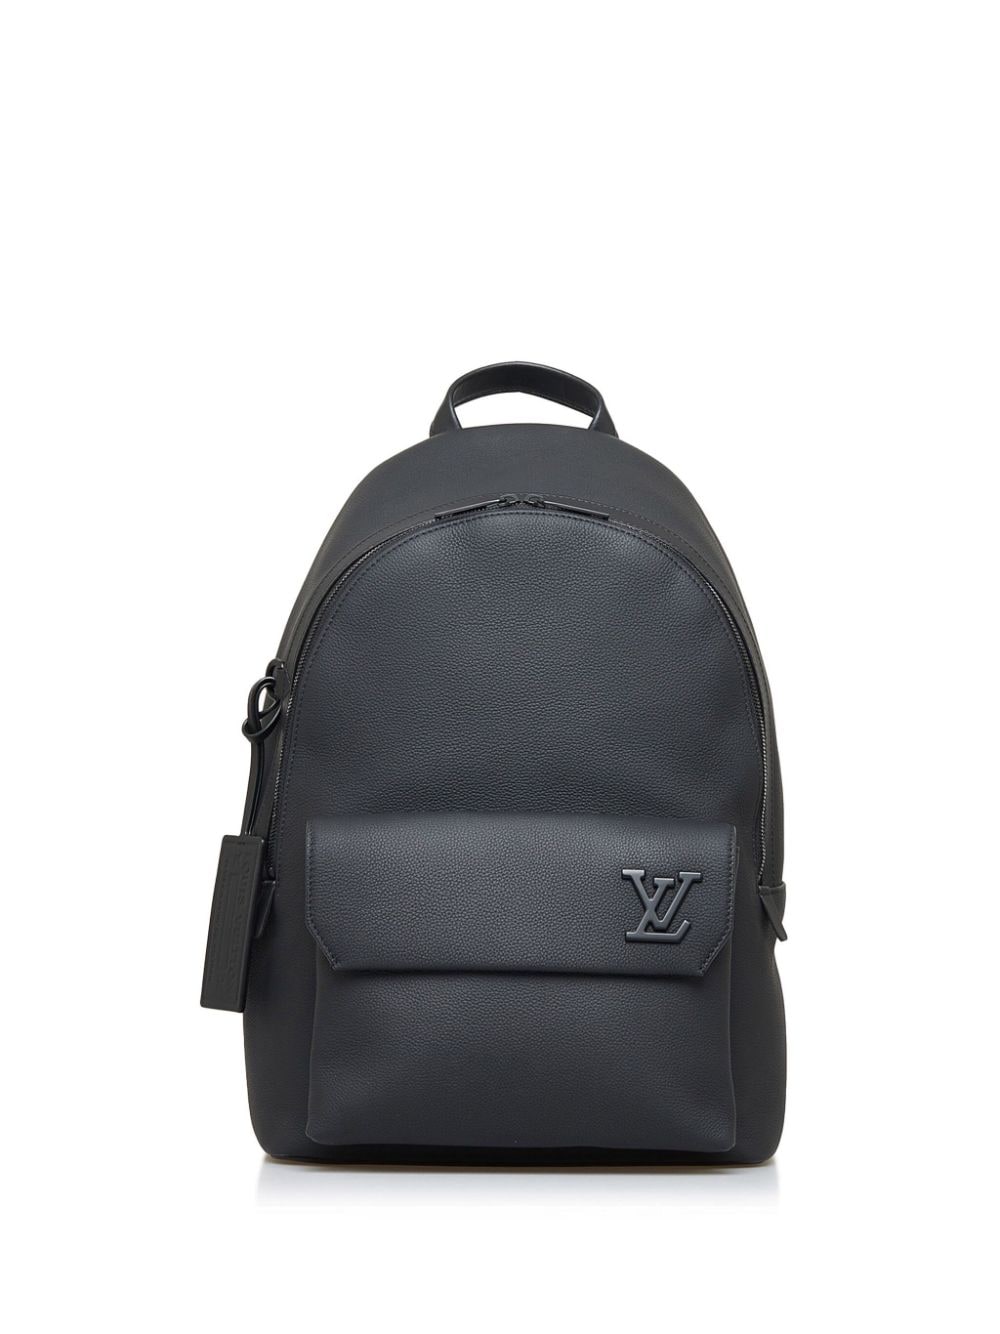 Louis Vuitton Black Aerogram Leather New Backpack - Handbag | Pre-owned & Certified | used Second Hand | Unisex